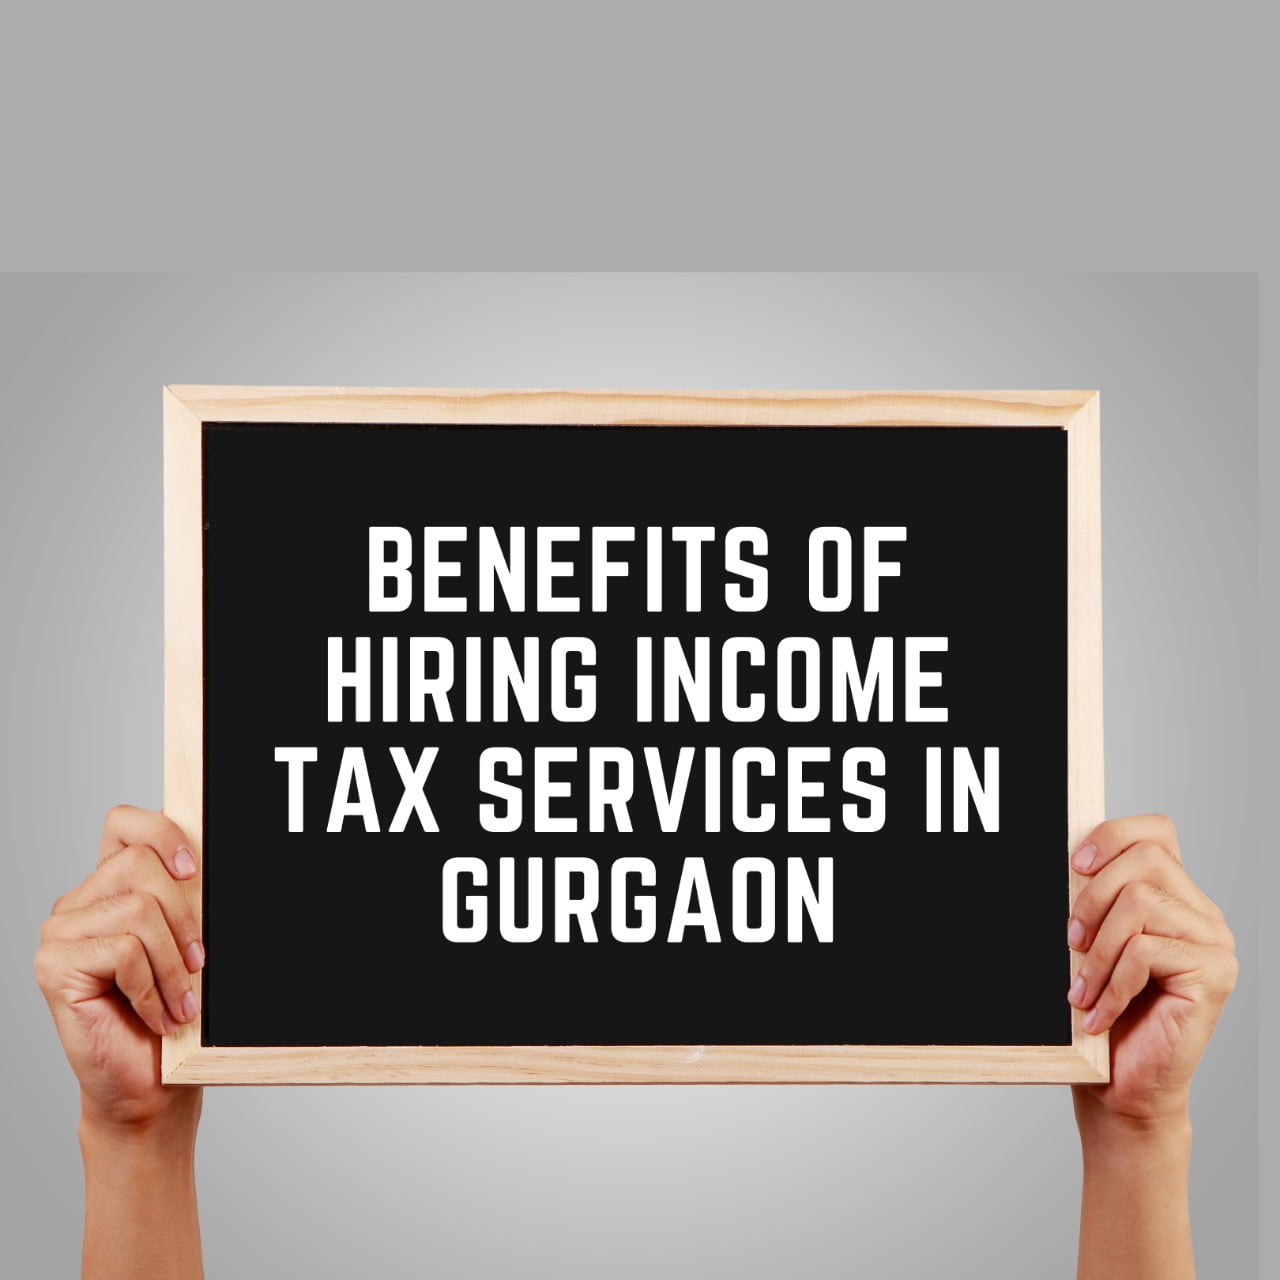 Benefits of Hiring Income tax services in Gurgaon | DMC Global